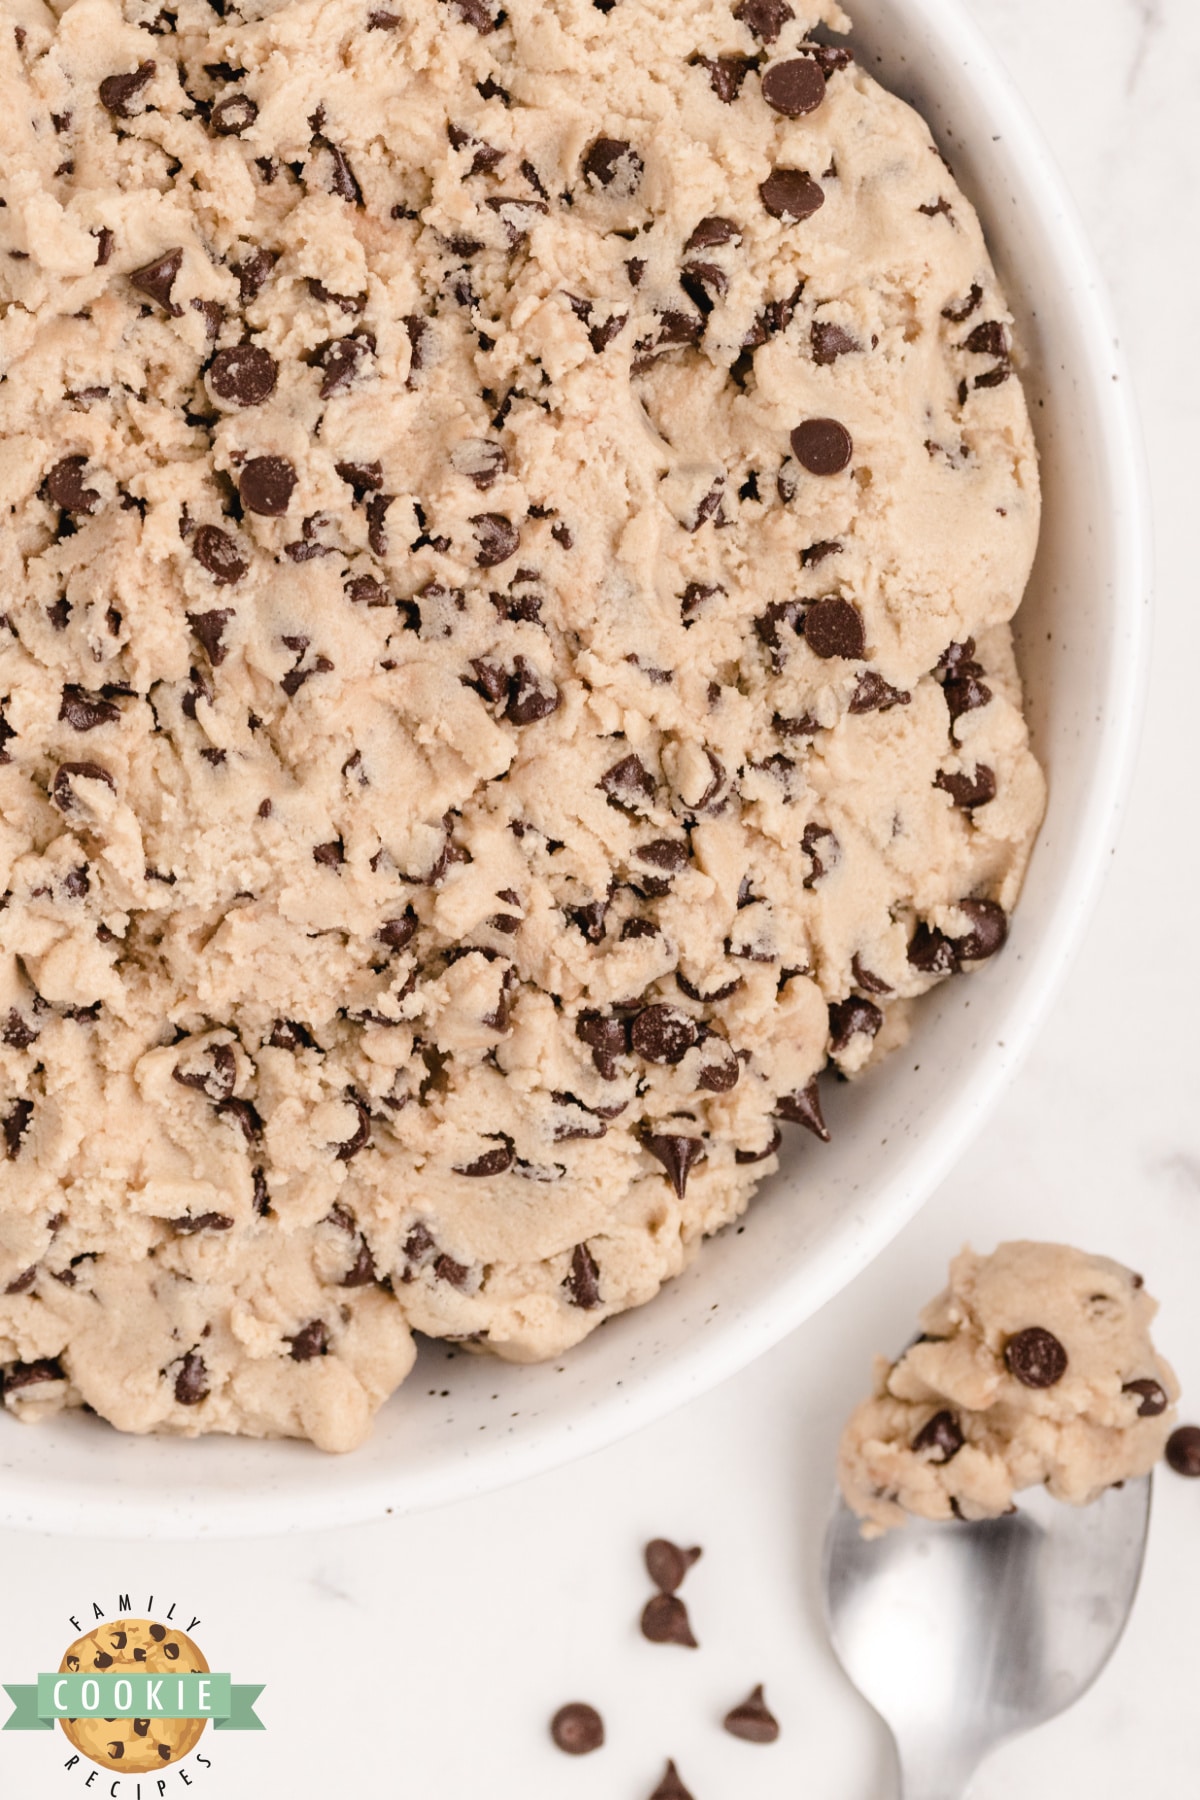 Chocolate Chip Cookie Dough that is safe to eat